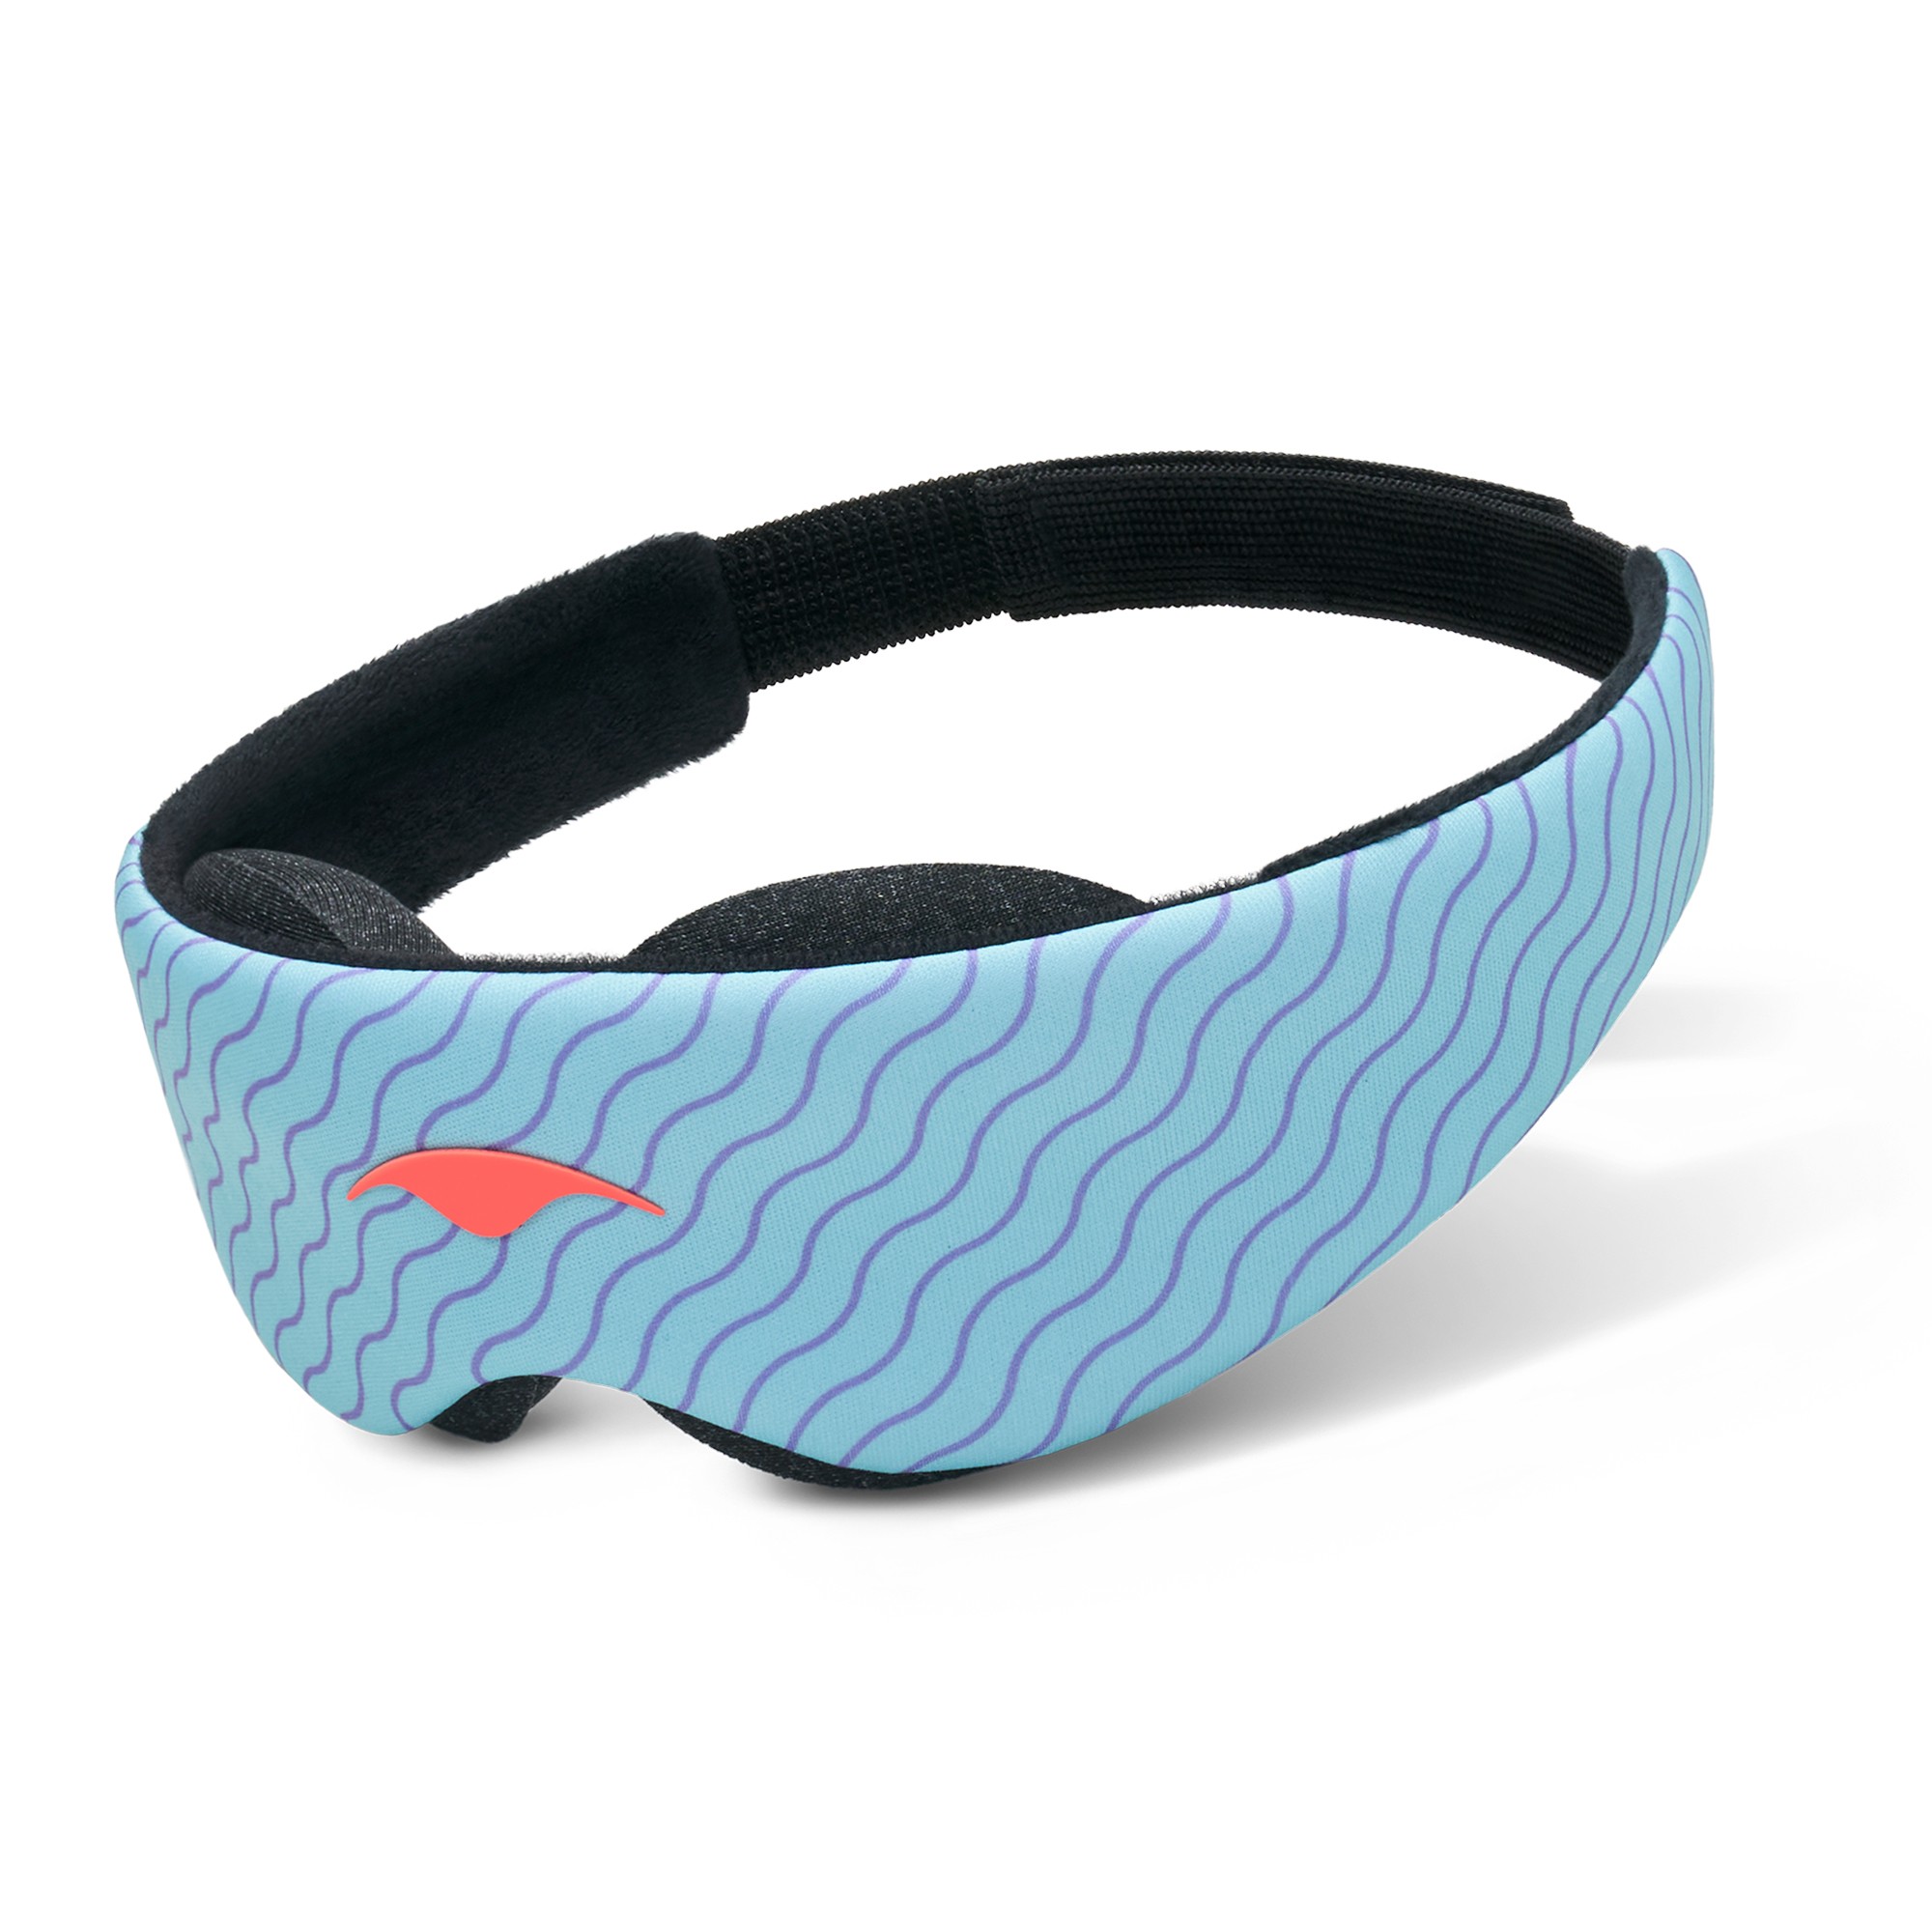 A blue sleep mask for boys with eye cups and a wiggly line design.